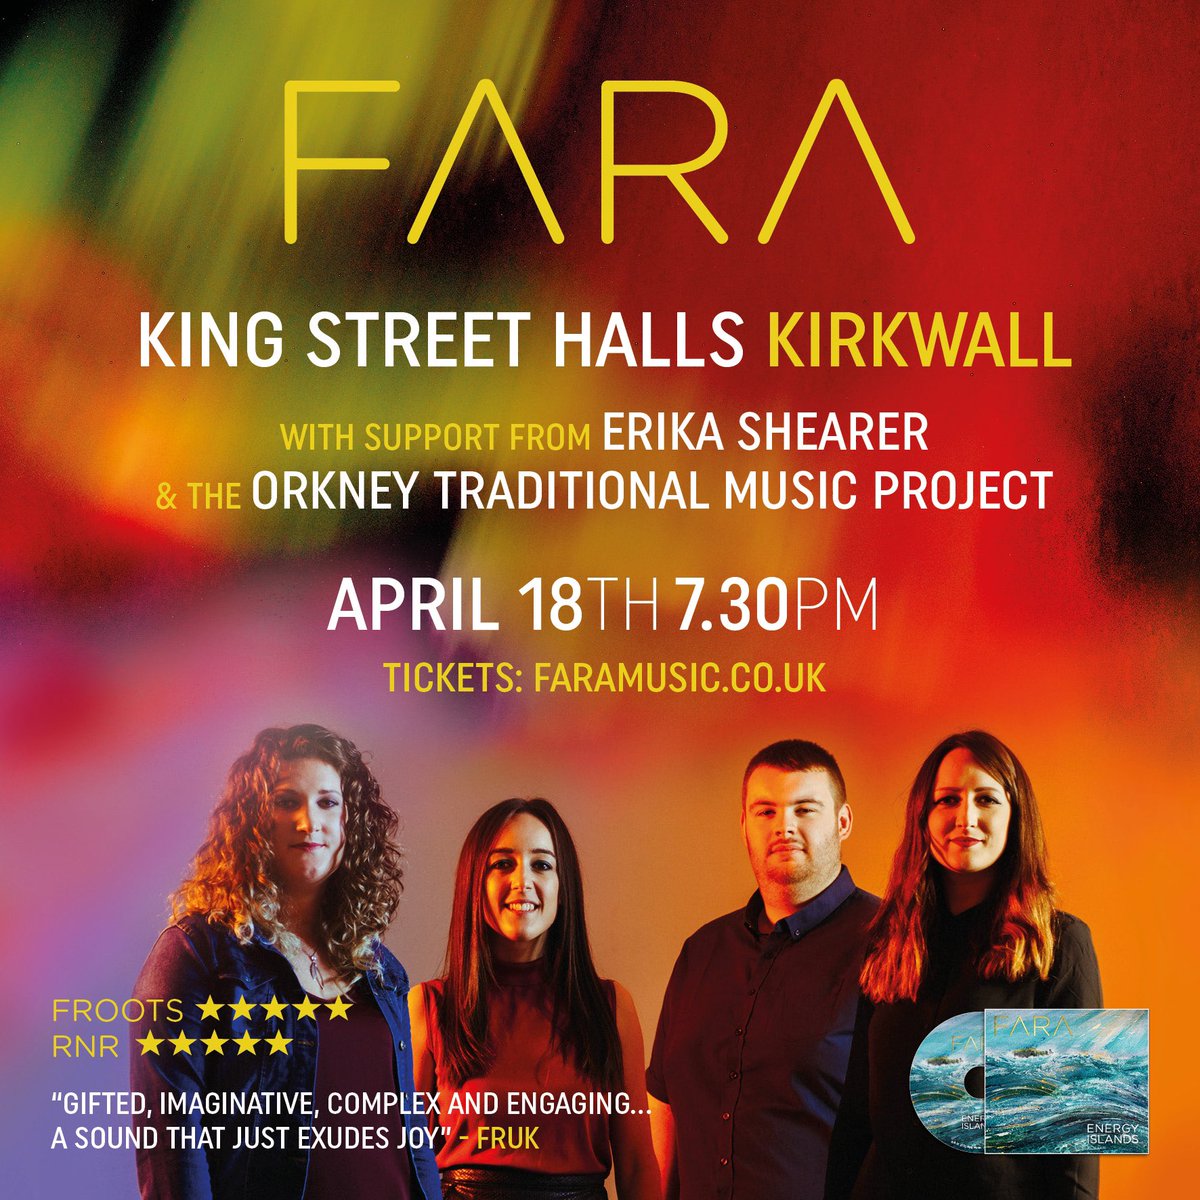 Just a week to go and only a few tickets left! It'll be a lovely night. buytickets.at/fara/1193876